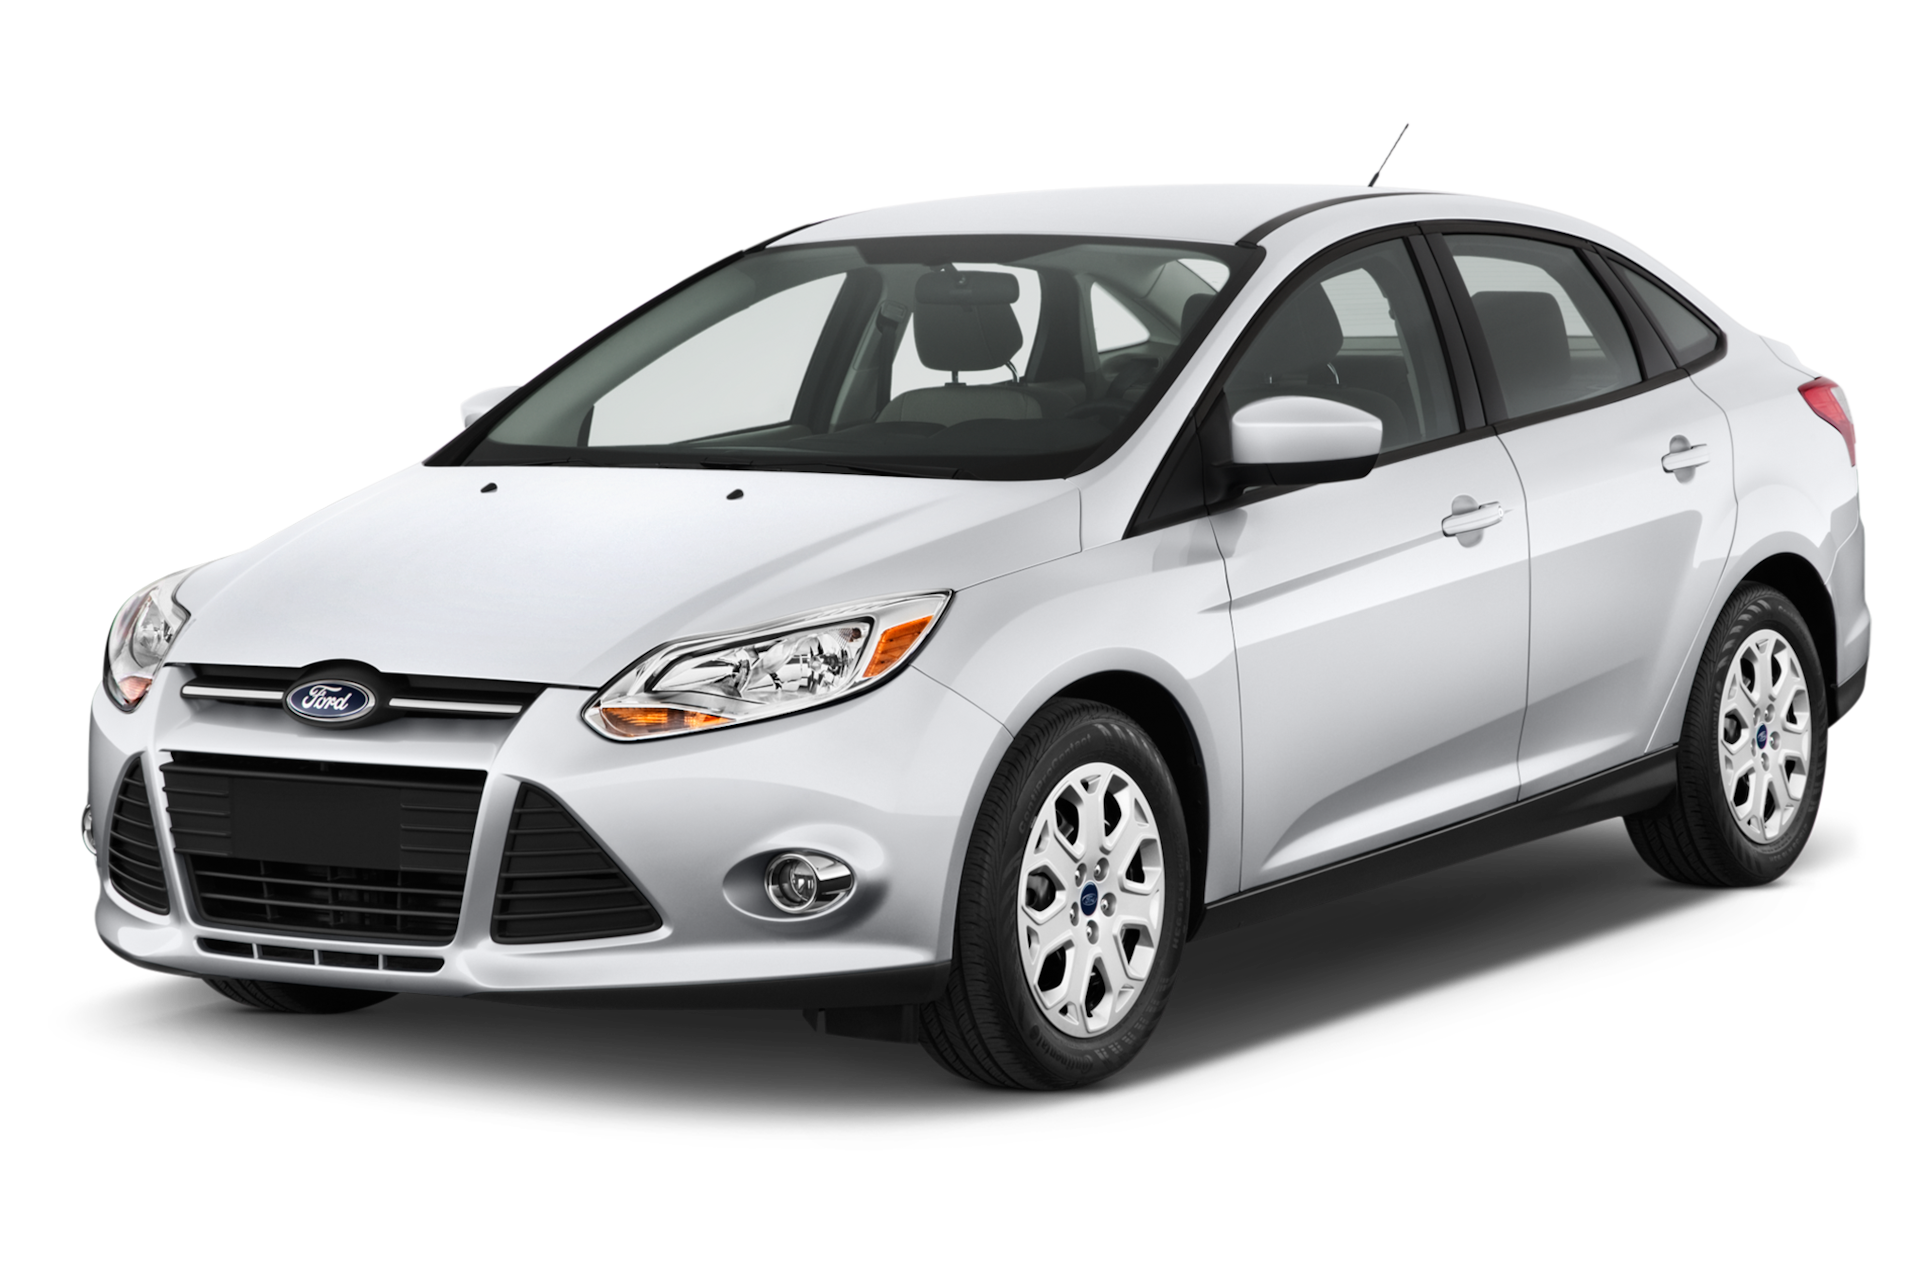 2013 Ford Focus Prices, Reviews, and Photos - MotorTrend